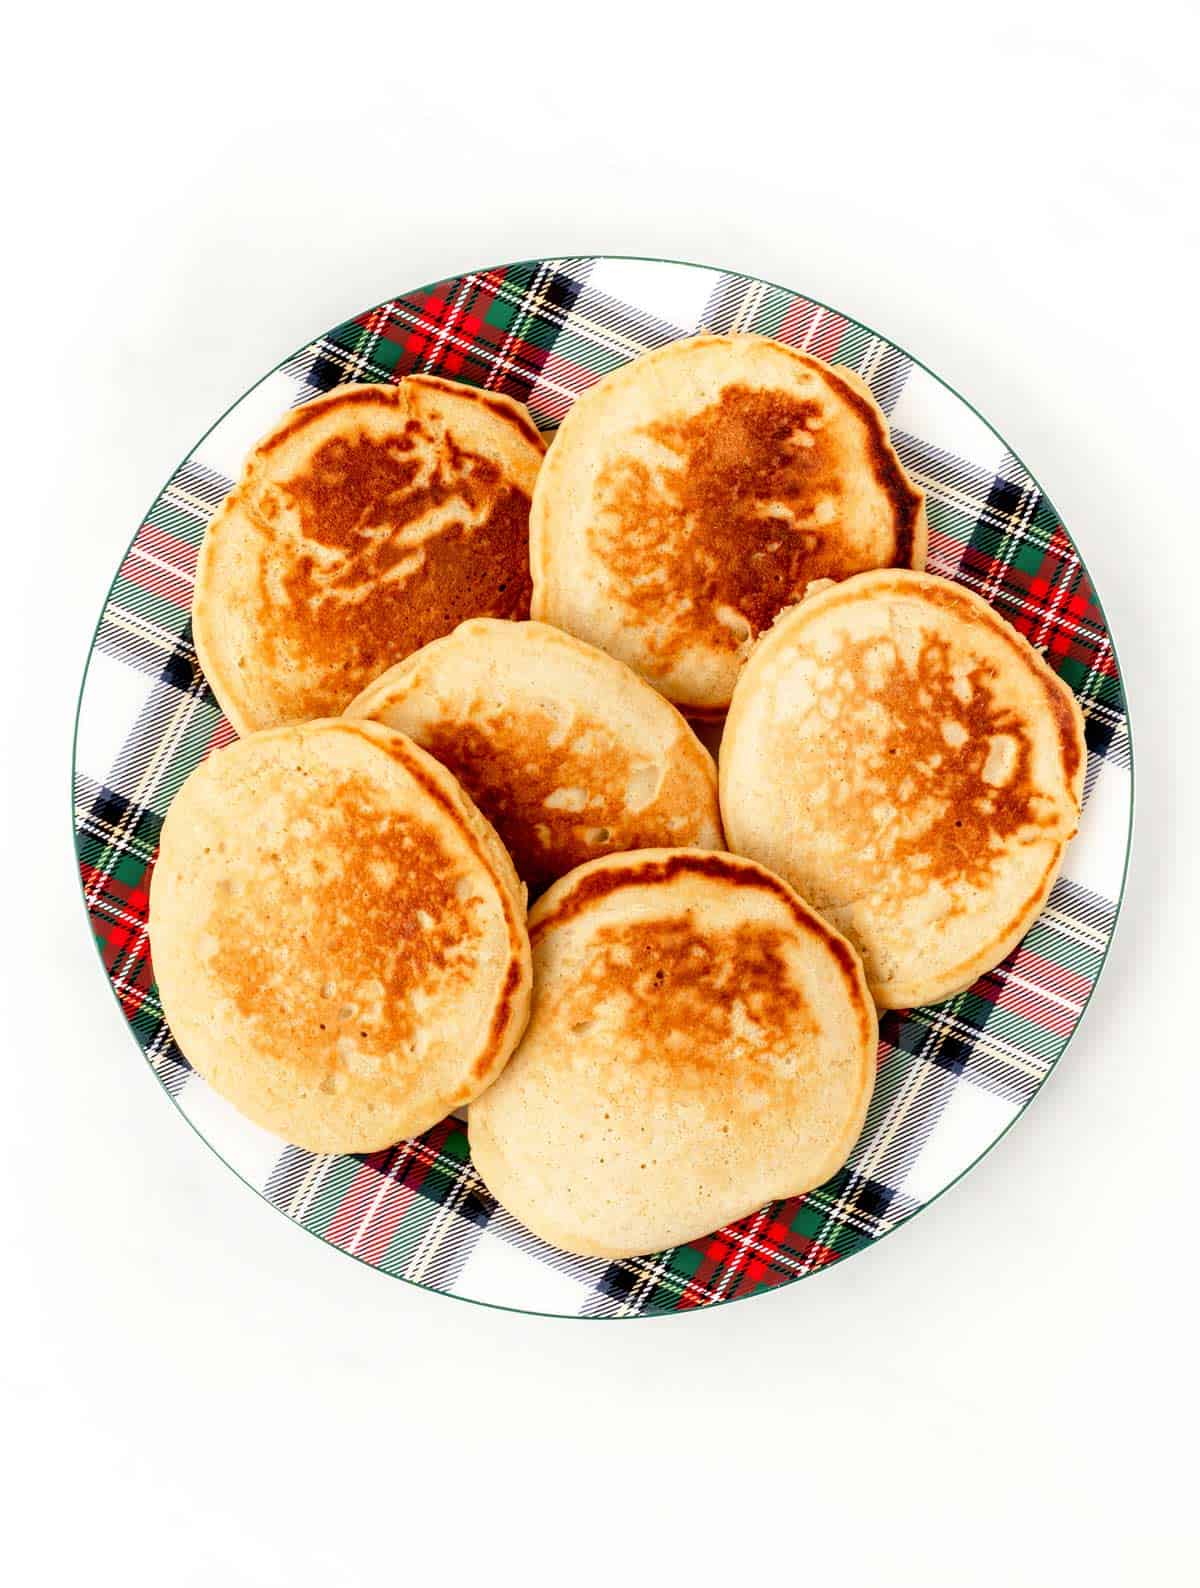 A plate of cooked pancakes on a plaid plate.